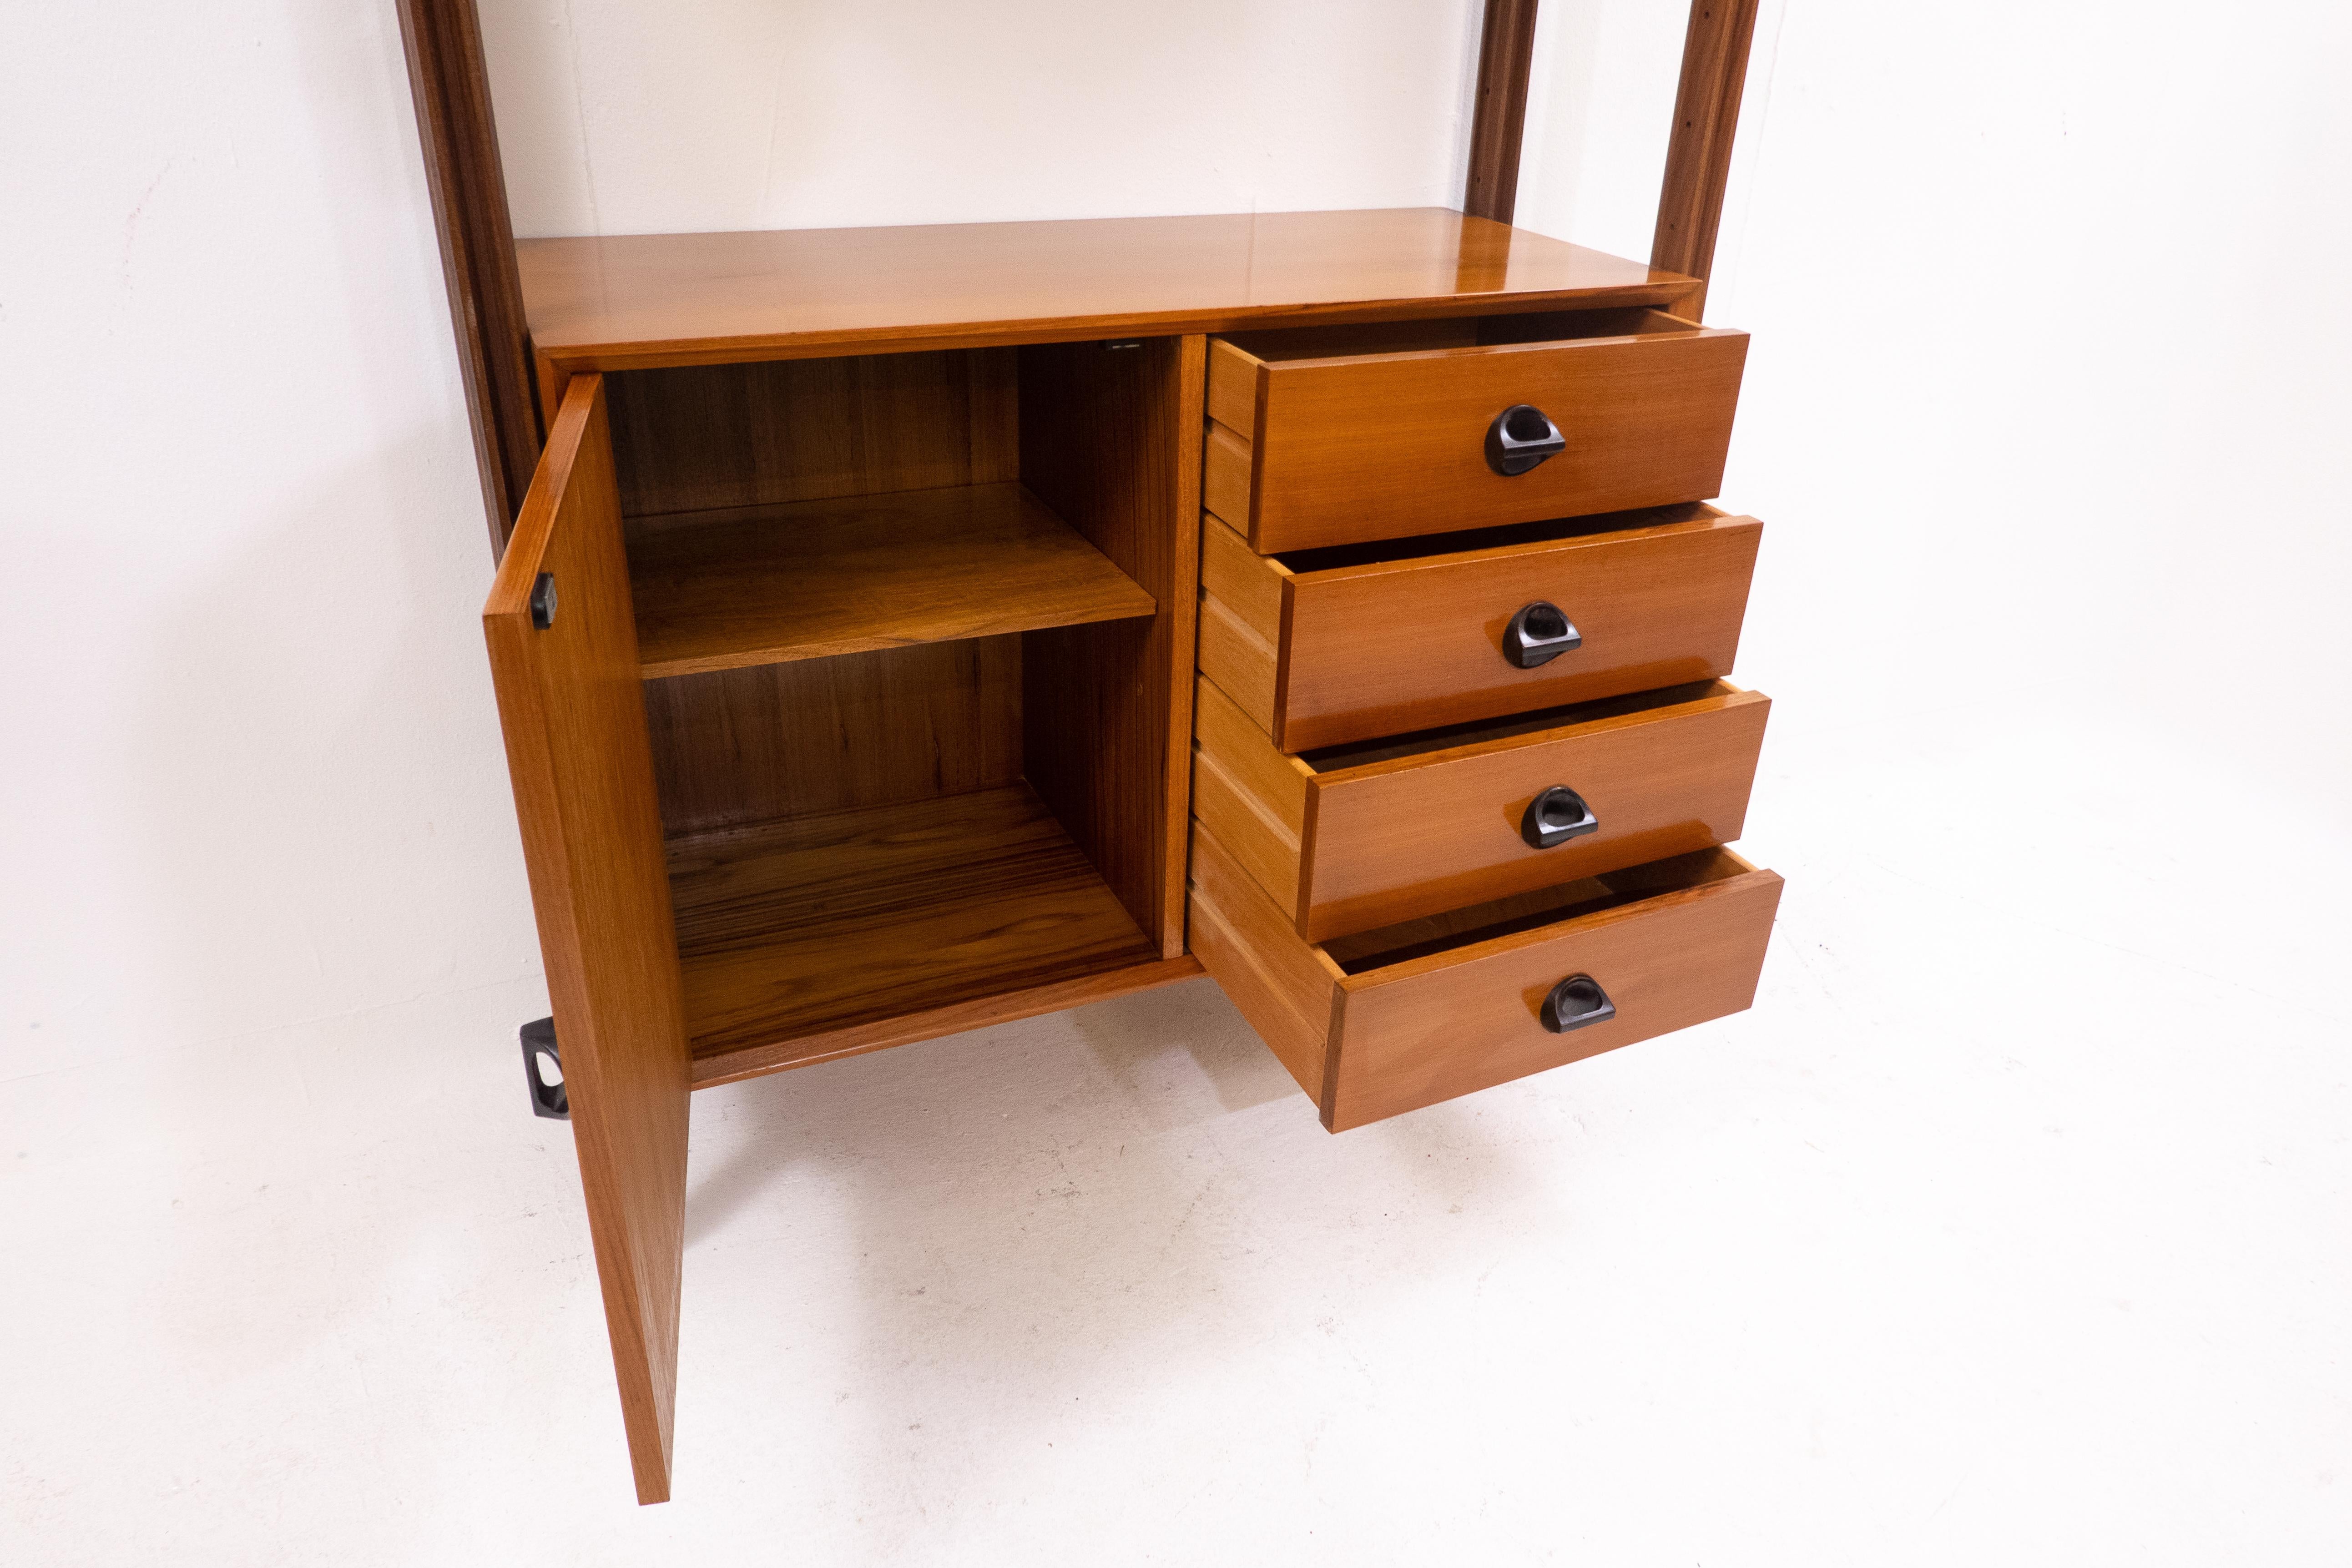 Mid-Century Modern wooden wall unit with drawers - Italy 1960s.